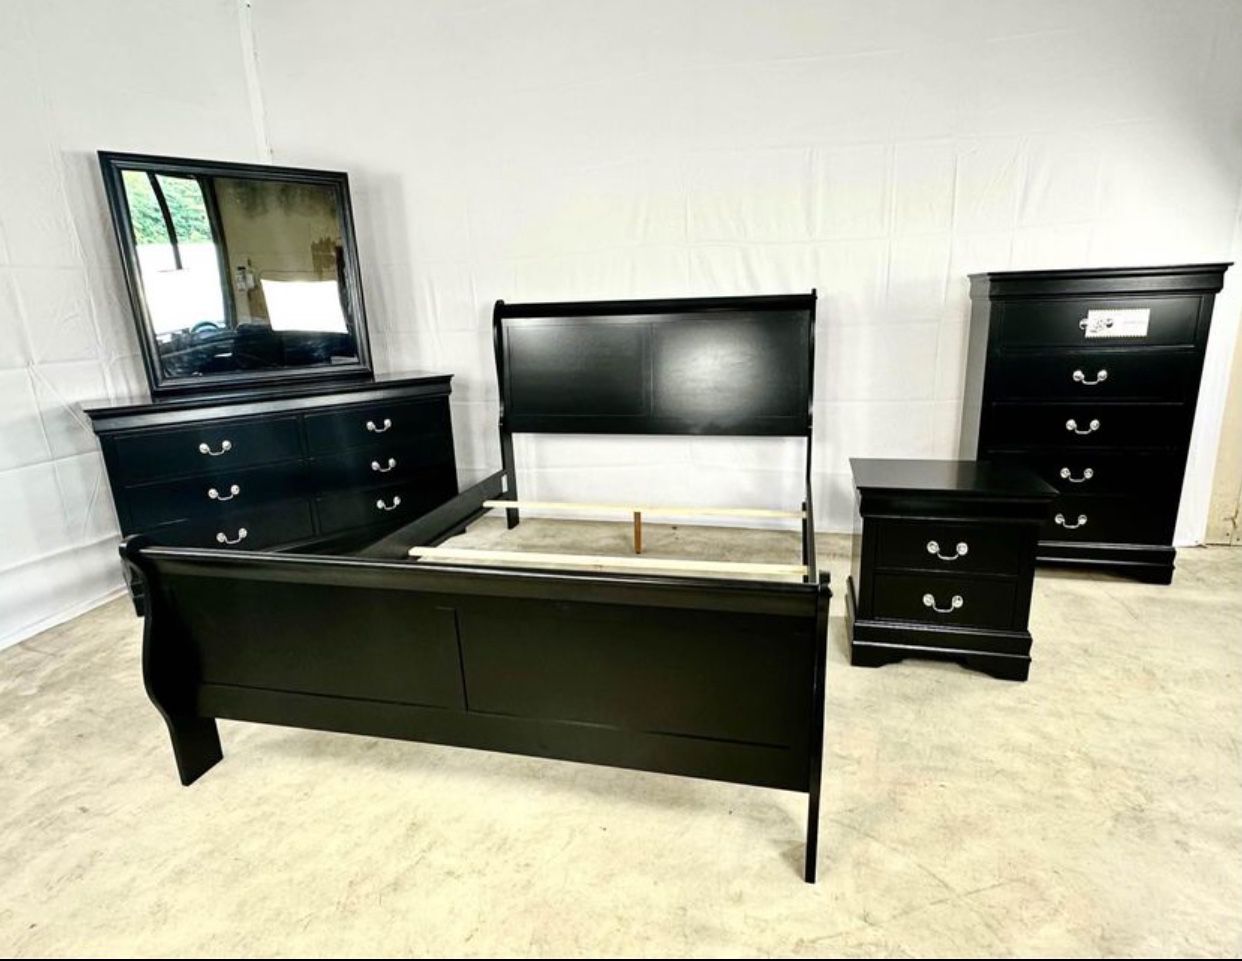 FREE DELIVERY & INSTALLATION - BRAND NEW Set of 5 pieces Bedroom Set Black Color (Queen size)